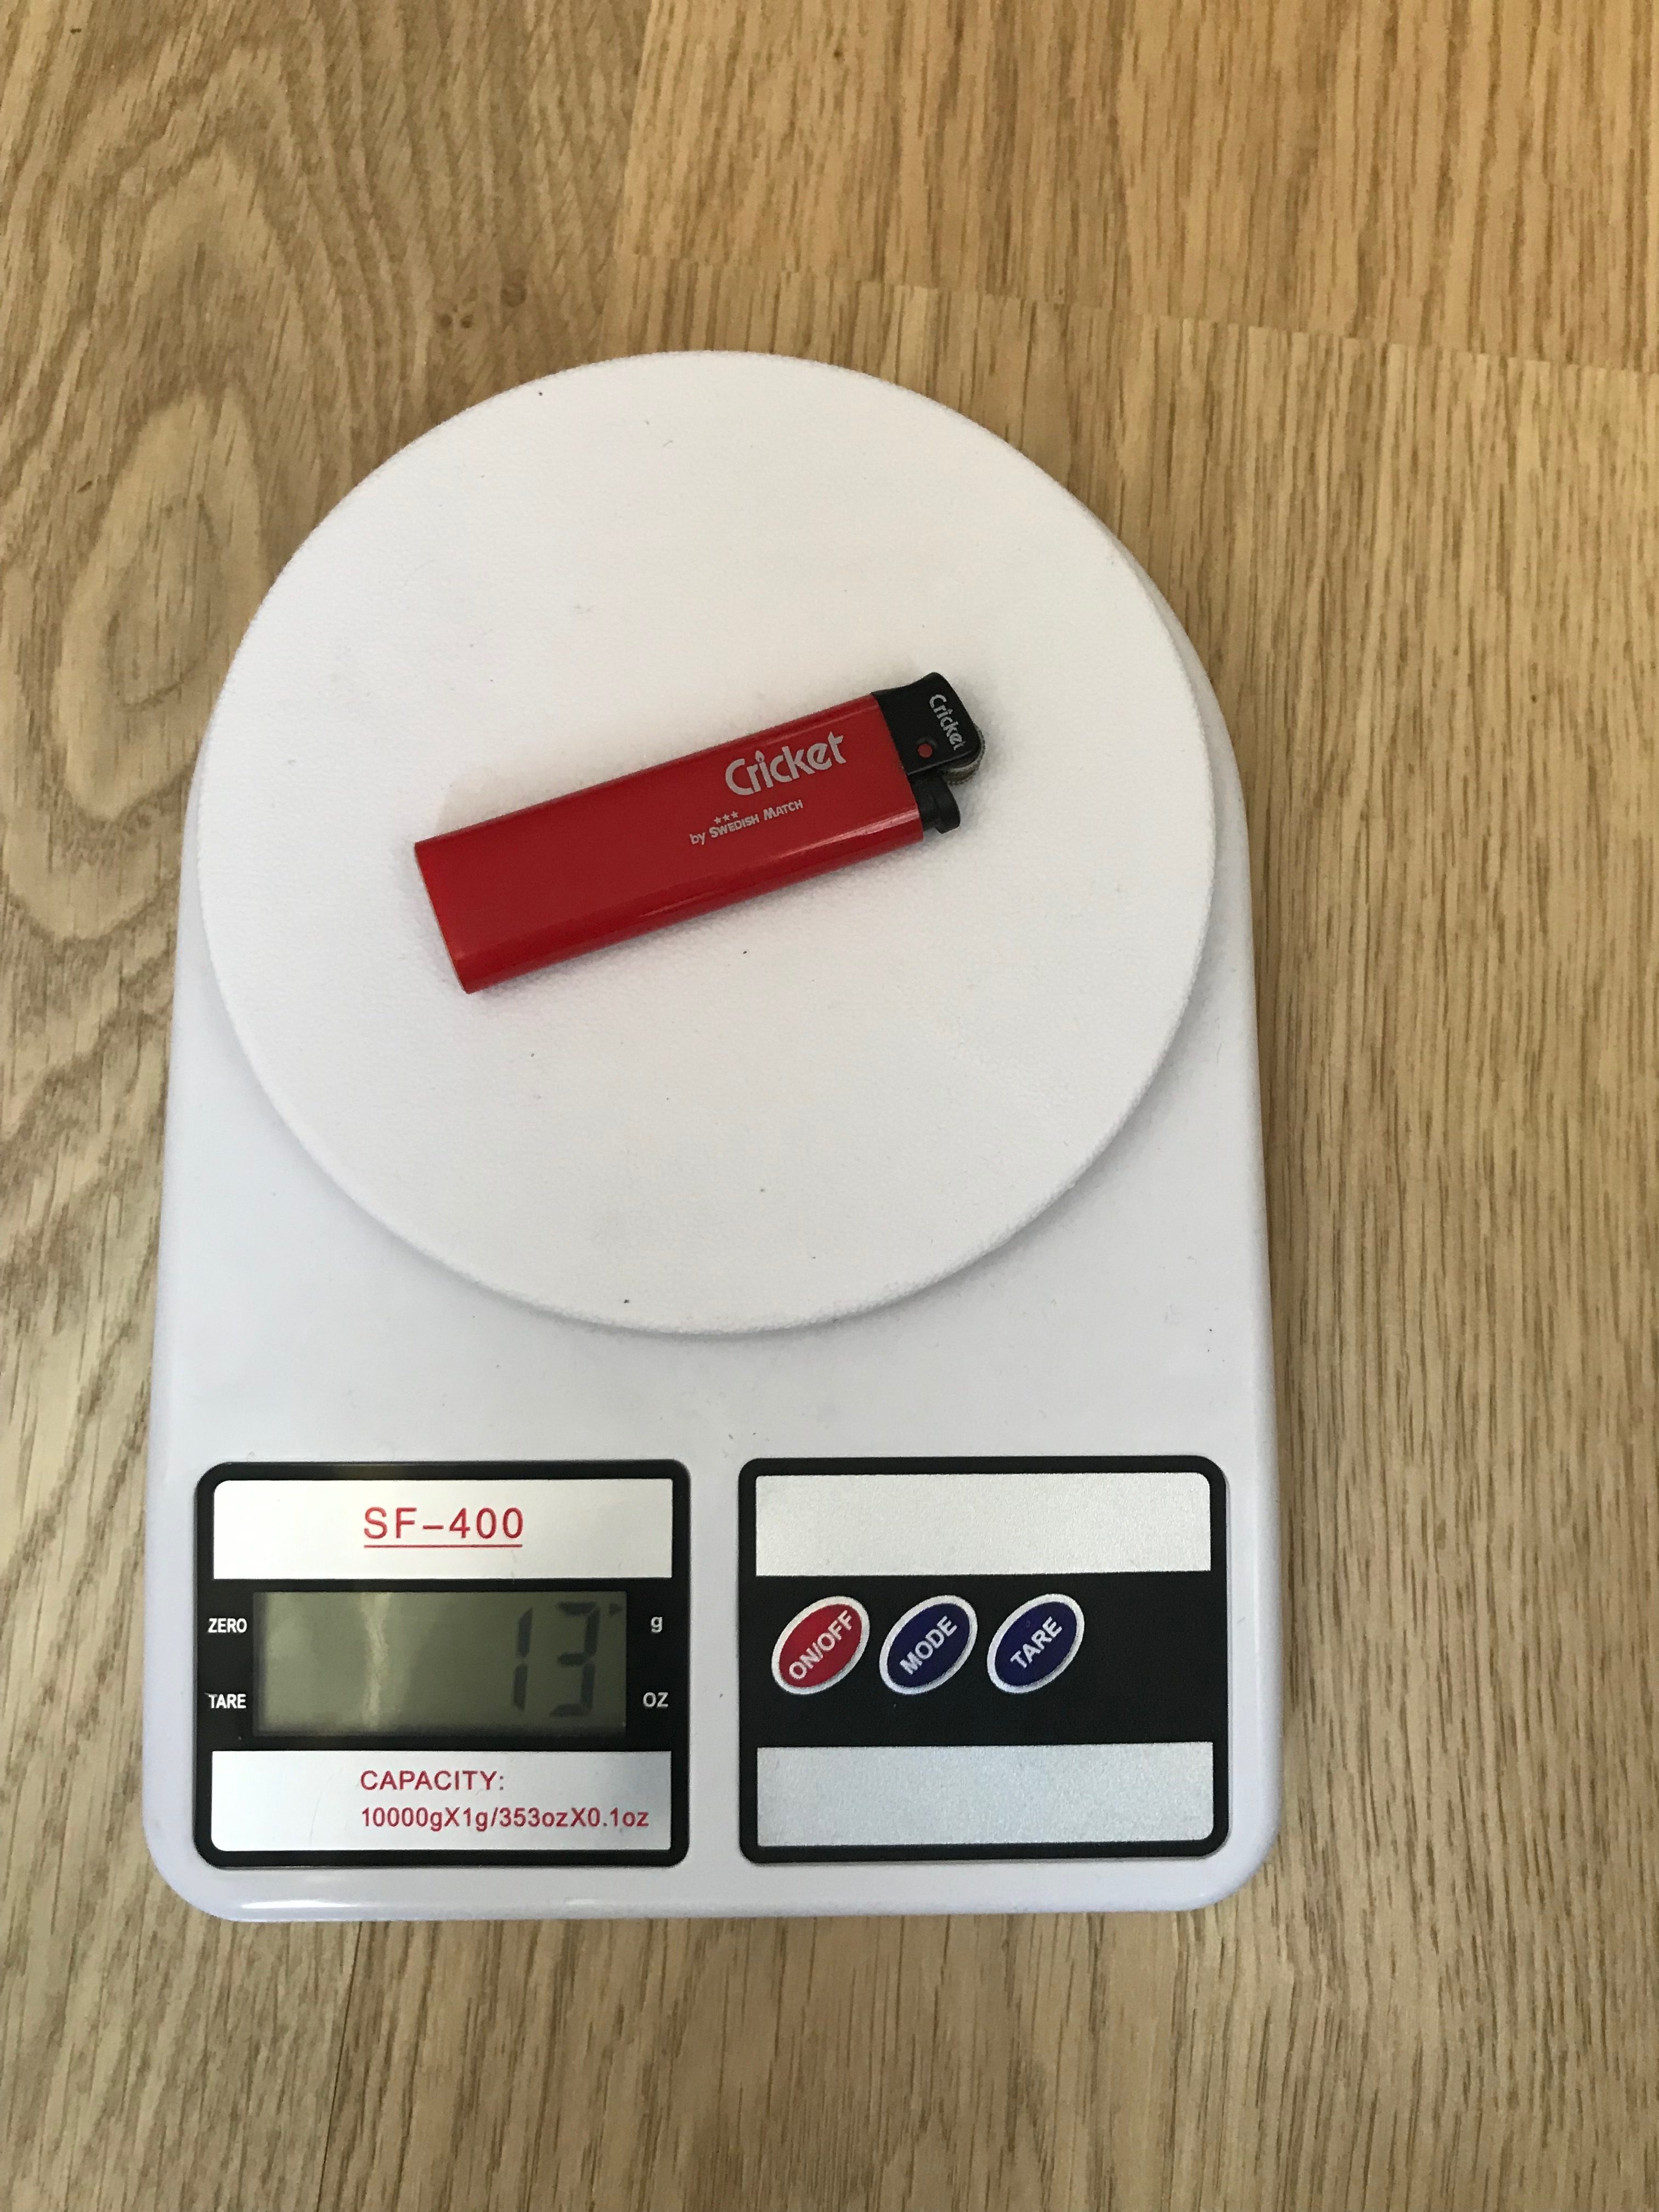 How much does the lighter weigh?